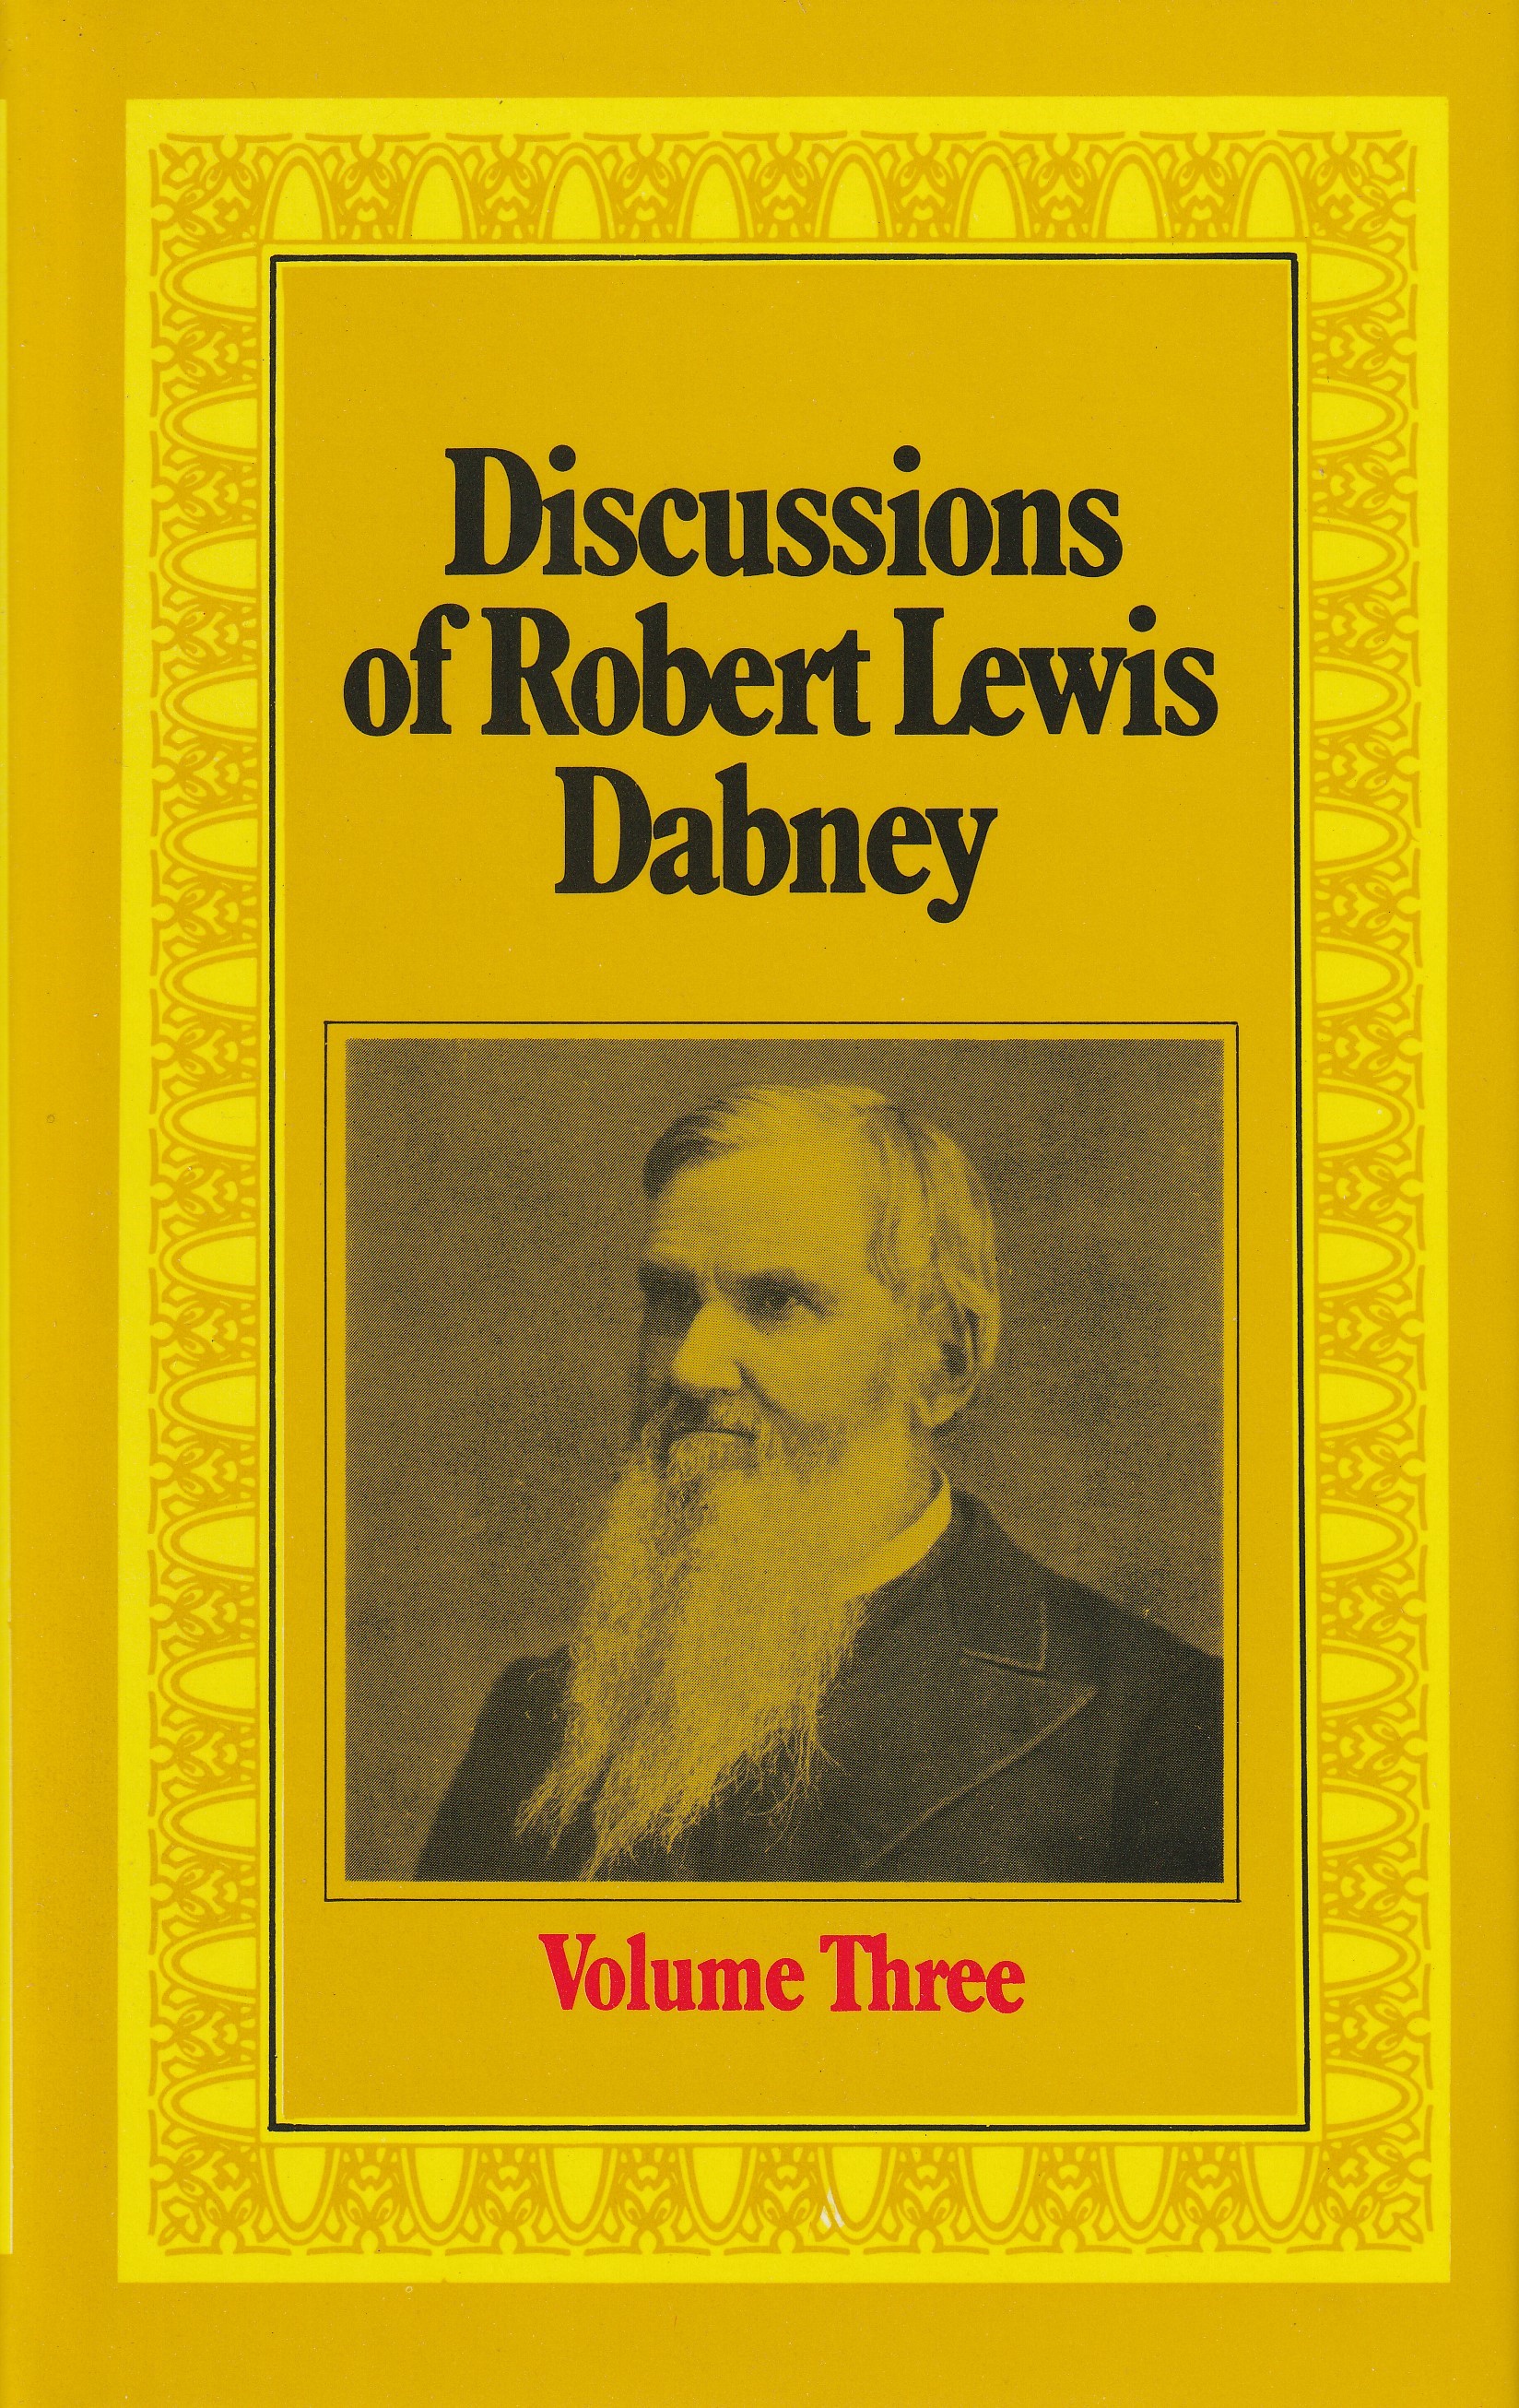 Discussions of Robert Lewis Dabney Vol. 3